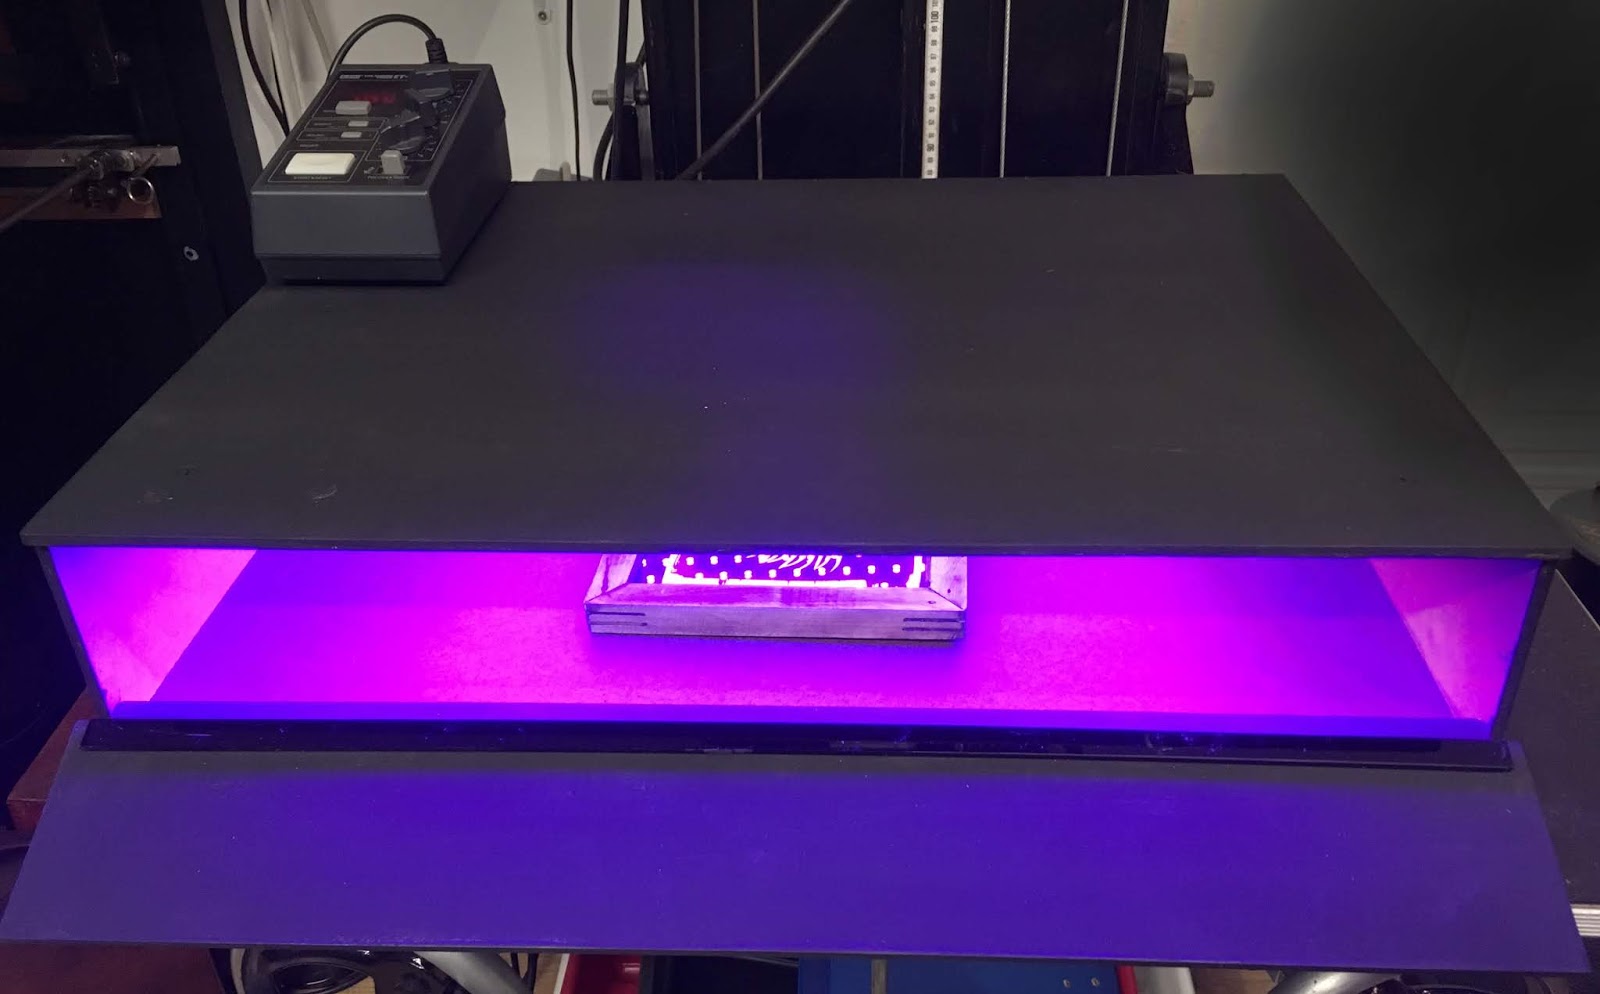 Building a UV LED light box for cyanotype and lumen printing